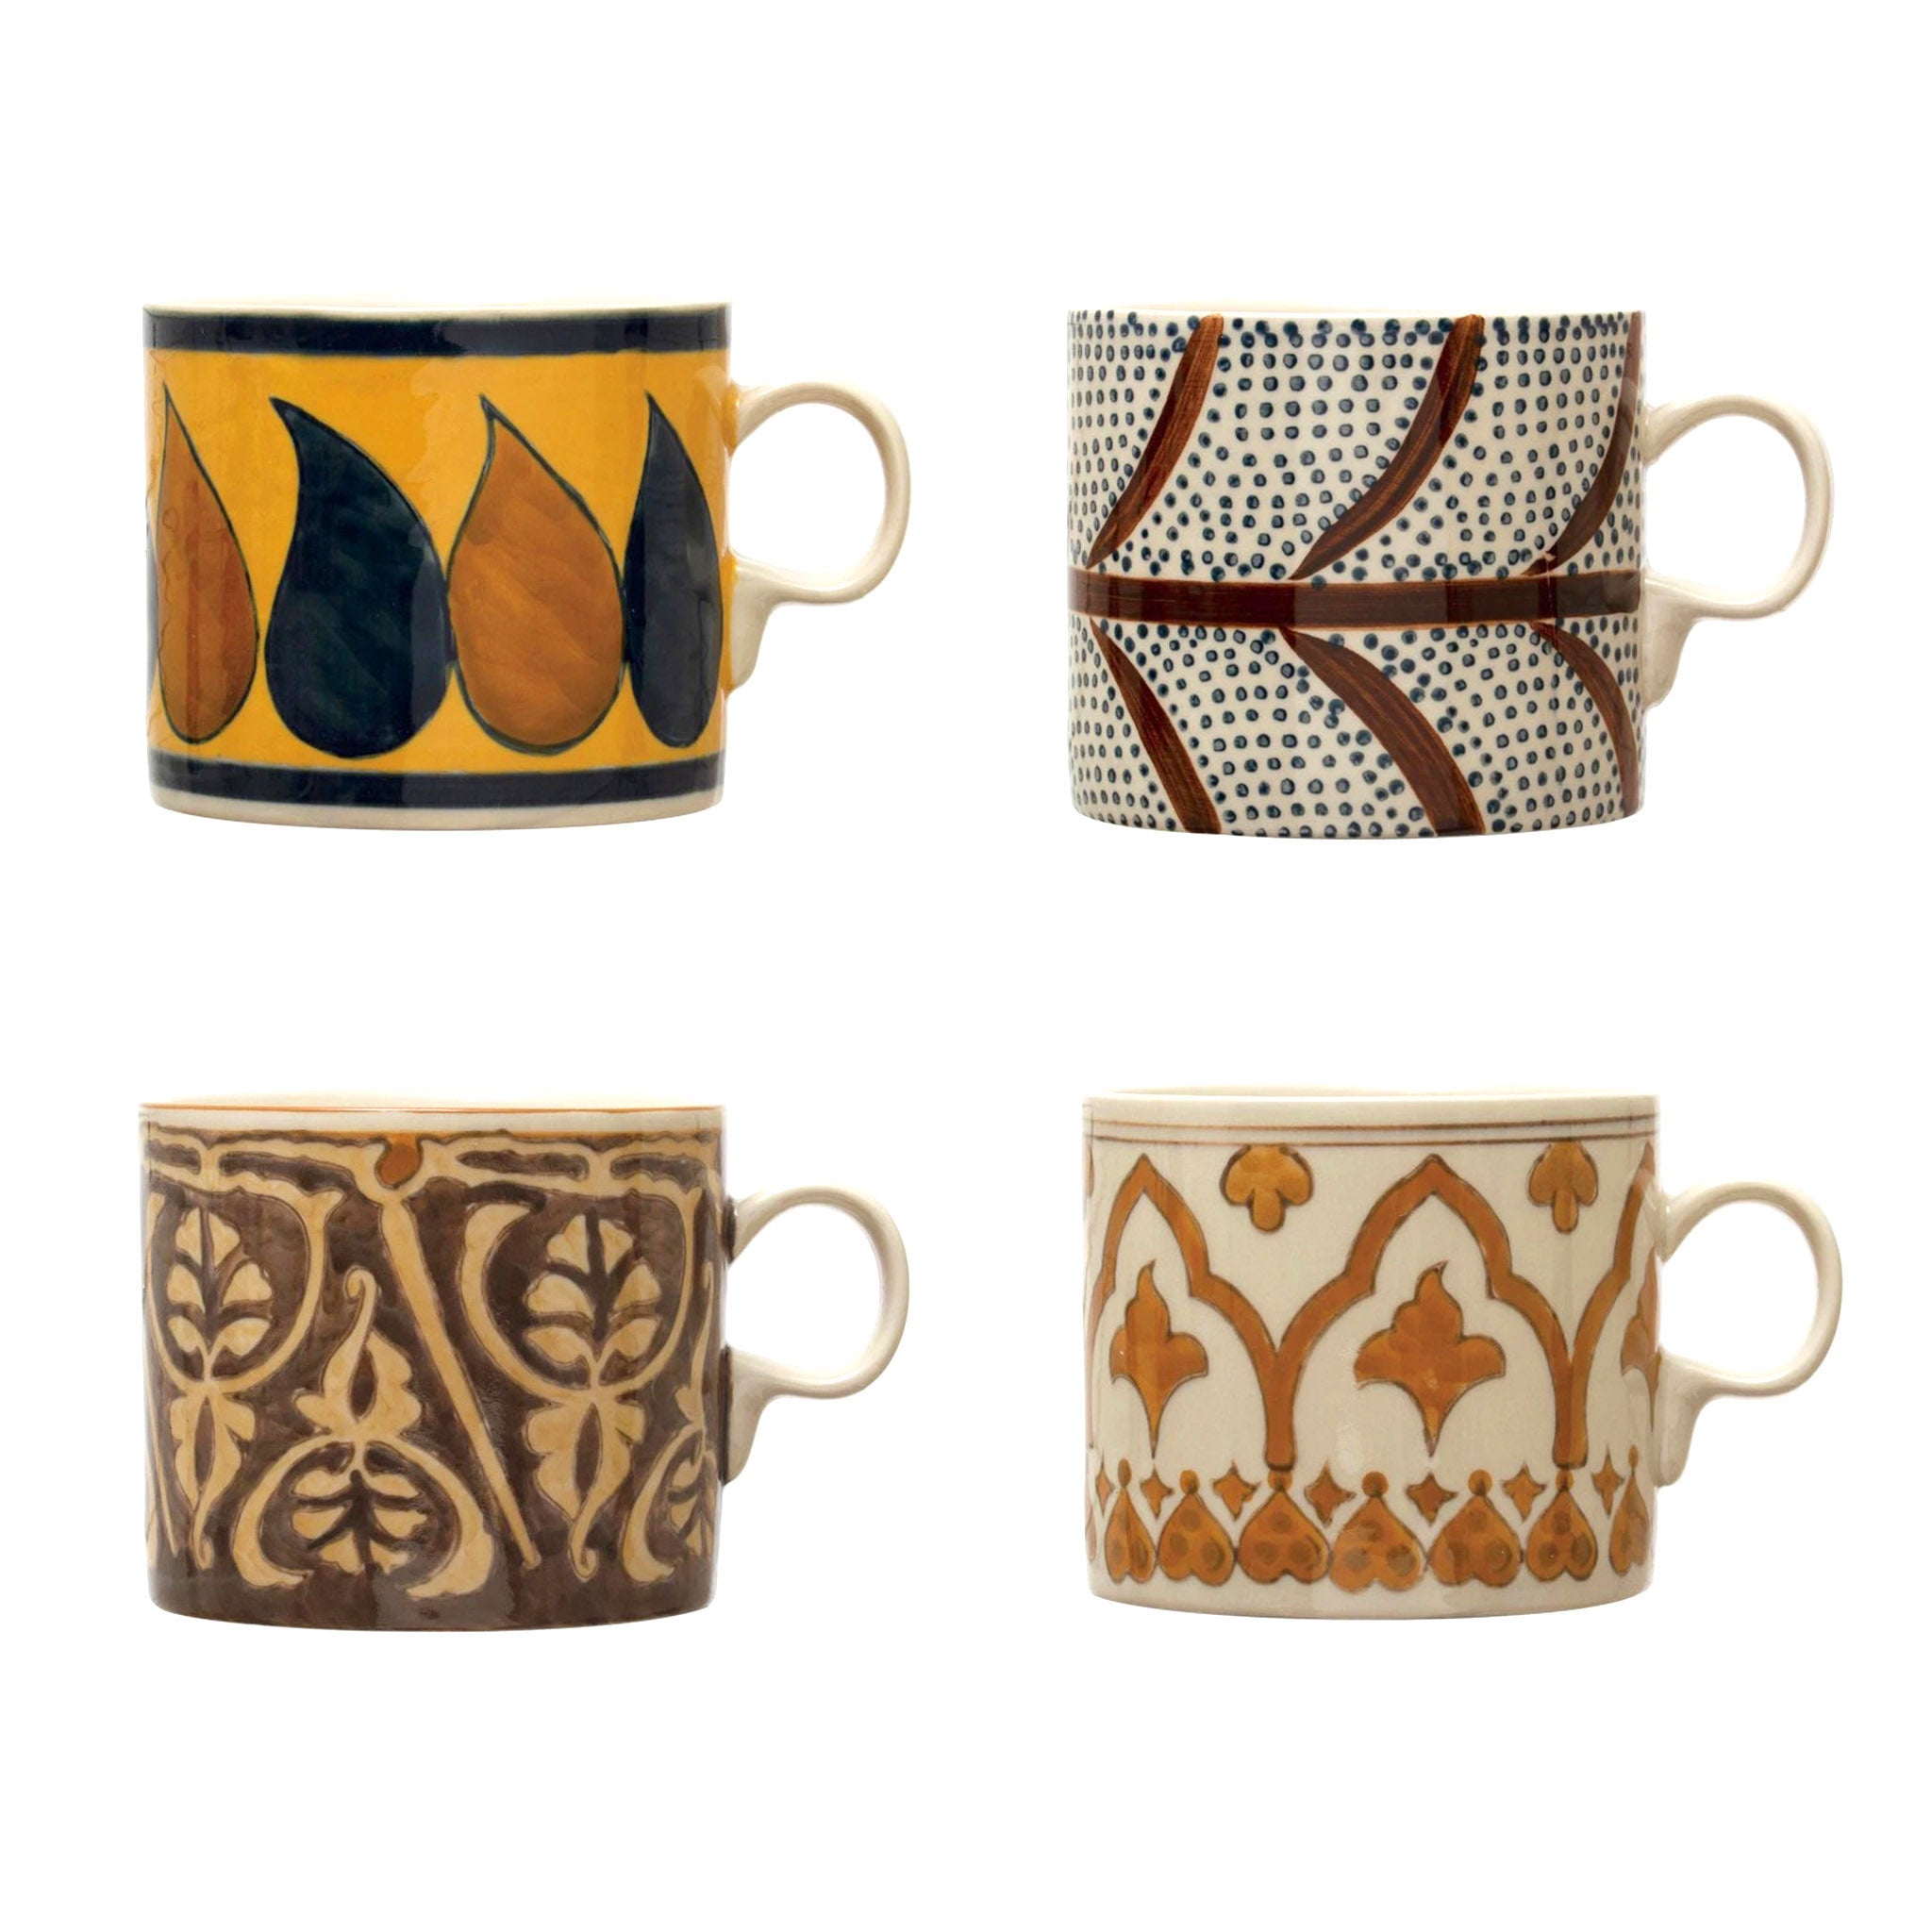 https://blueribbongeneralstore.com/cdn/shop/files/creative-co-op-df6783a-16-ounce-hand-painted-stoneware-mugs-with-brown-blue-and-cream-patterns-in-4-styles.jpg?v=1692226927